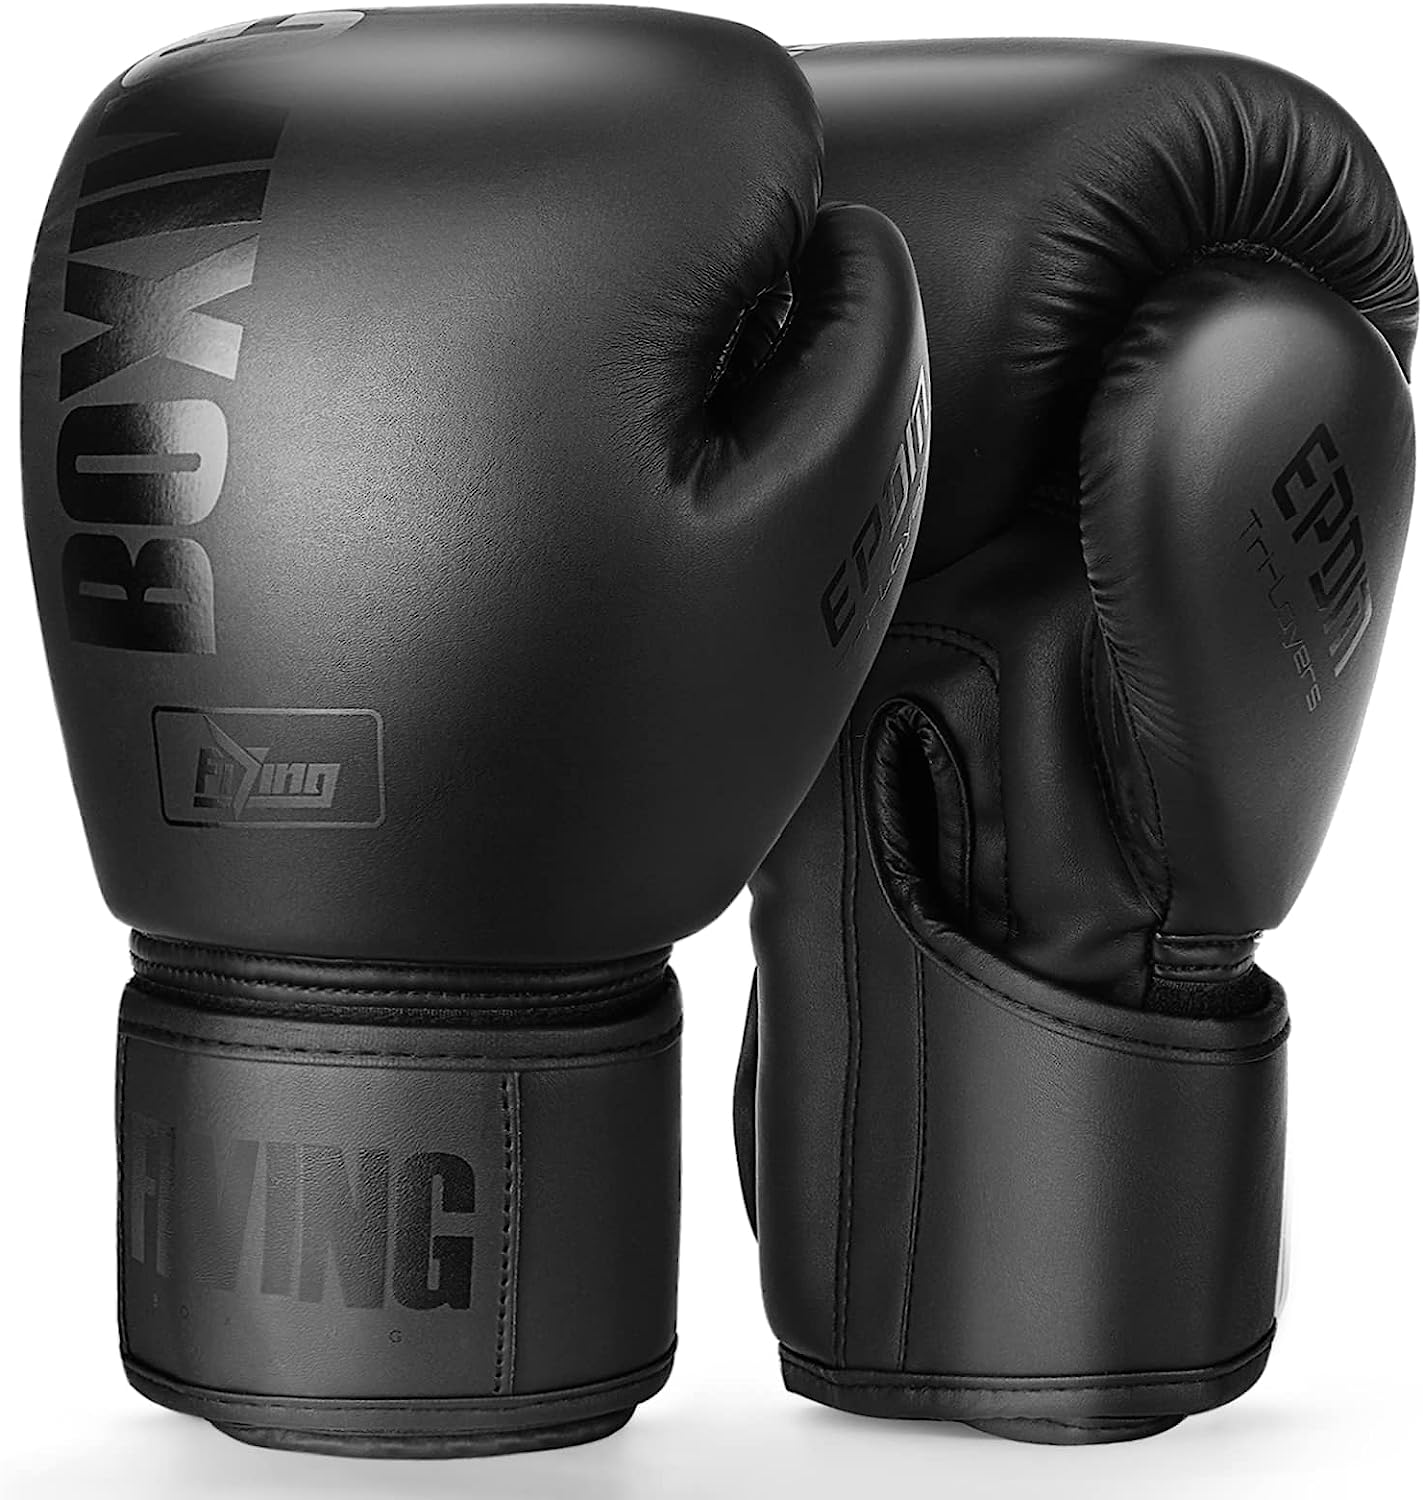 selection of heavy bag gloves in different colors and styles